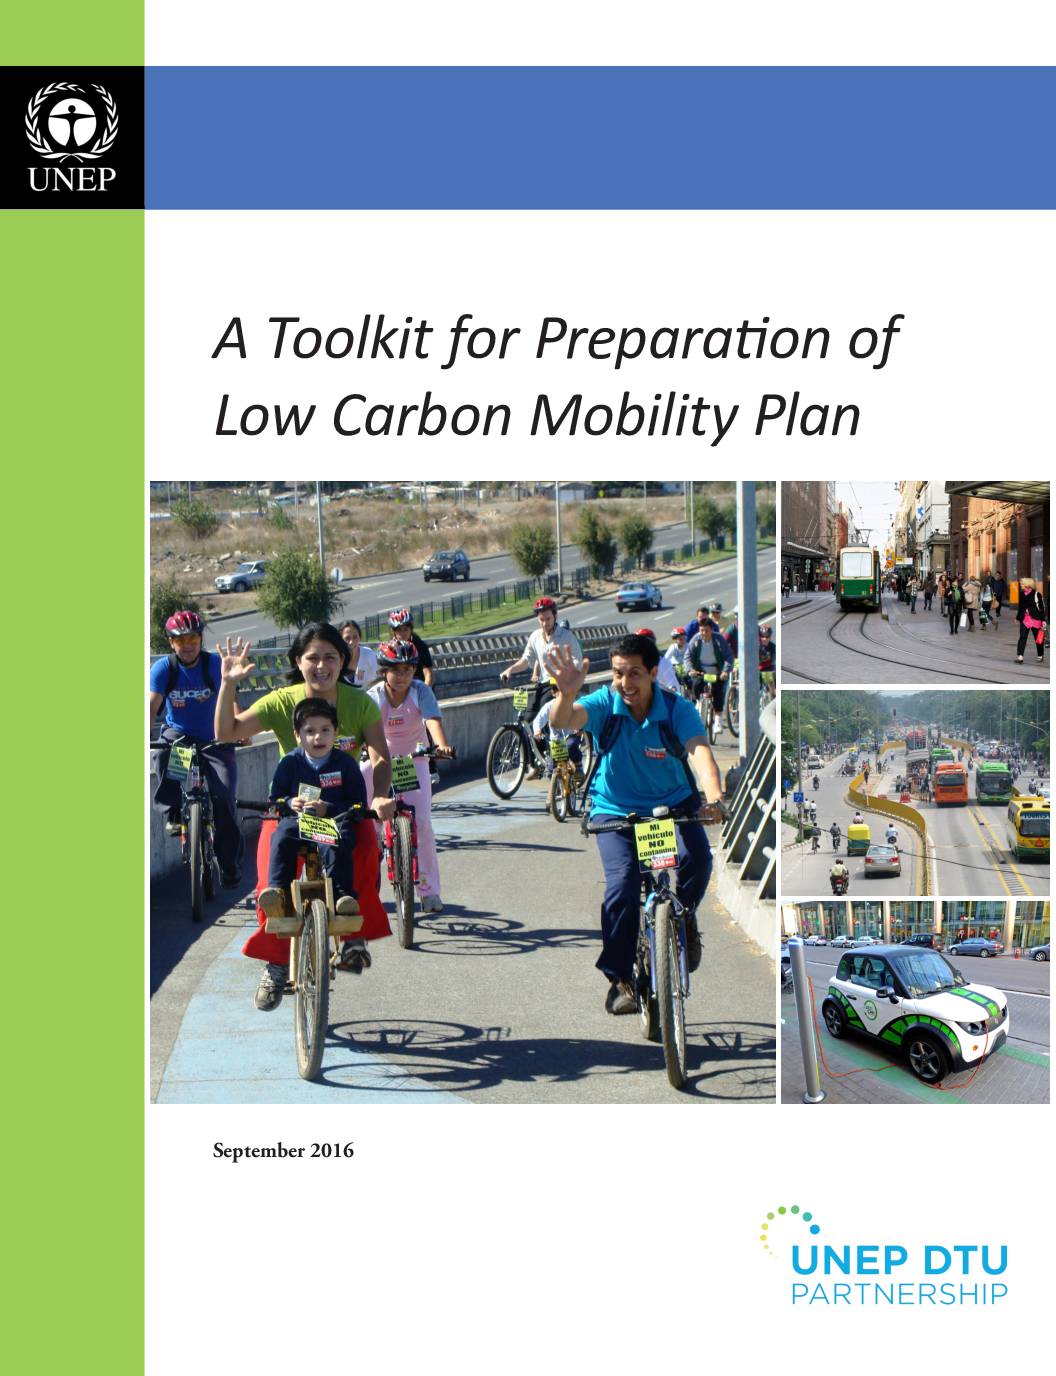 A Toolkit for Preparation of Low Carbon Mobility Plan